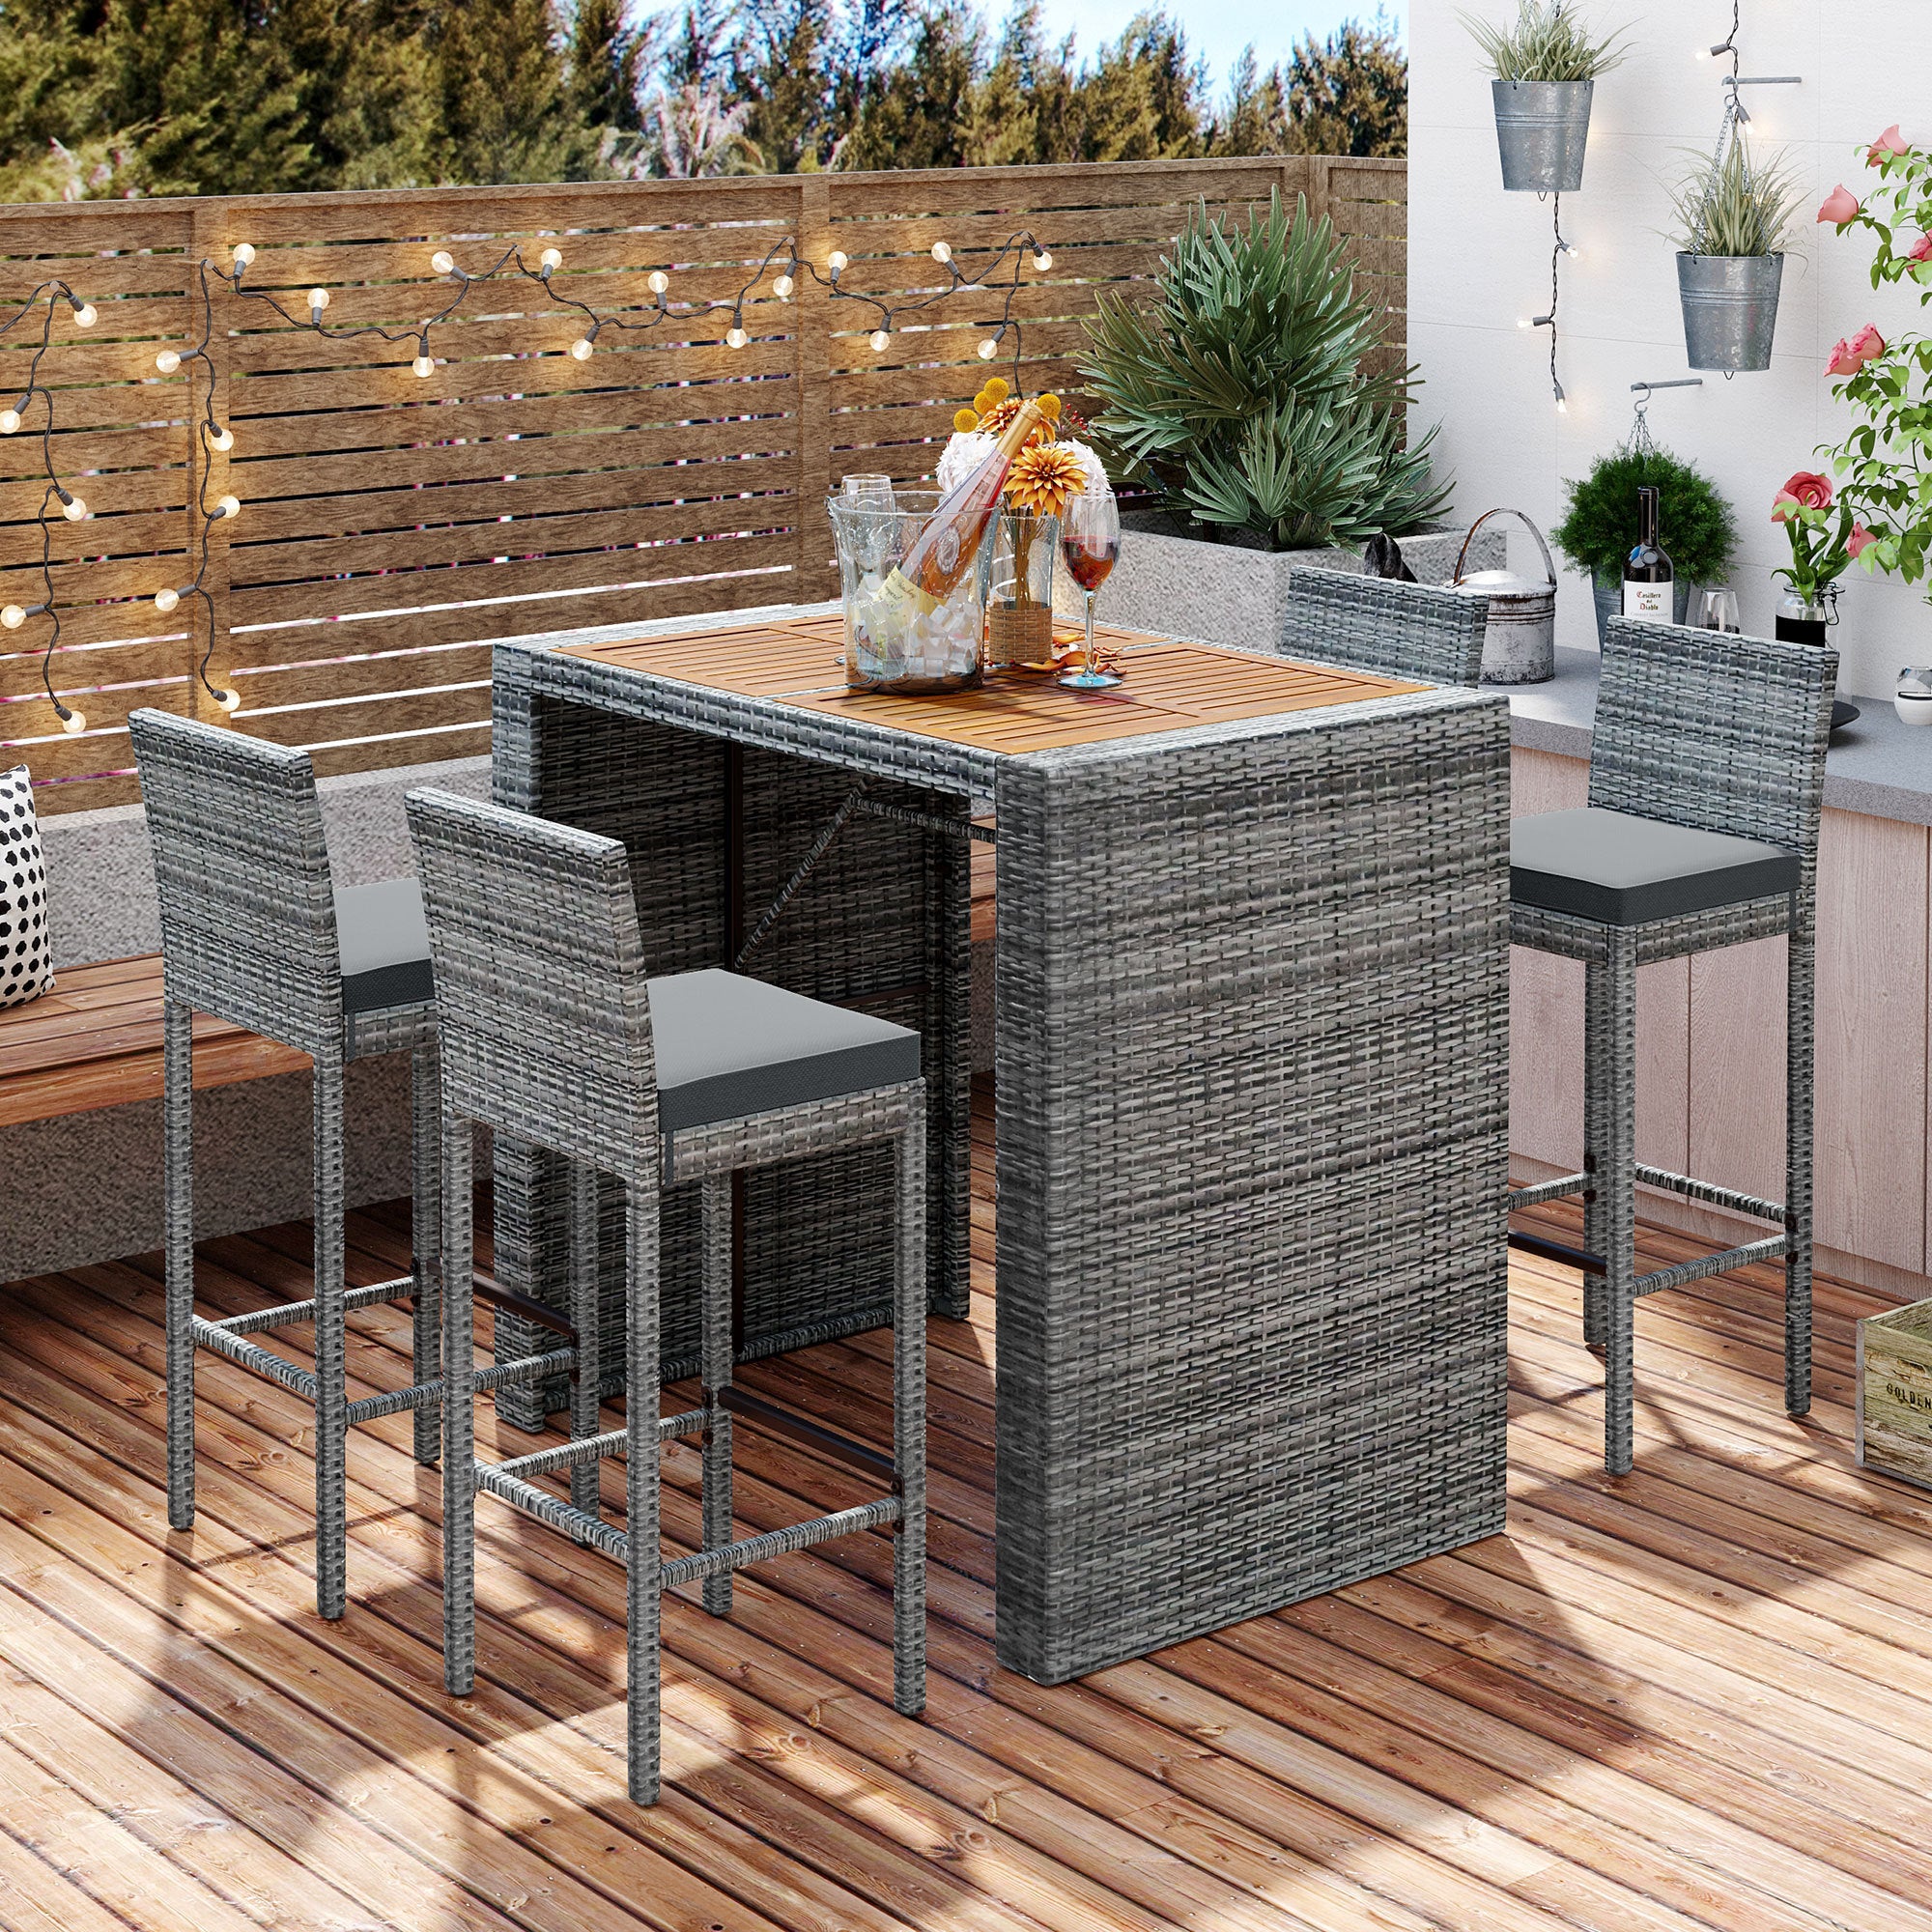 GO 5-pieces Outdoor Patio Wicker Bar Set, Bar Height Chairs With Non-Slip Feet And Fixed Rope, Removable Cushion, Acacia Wood Table Top, Brown Wood And Gray Wicker